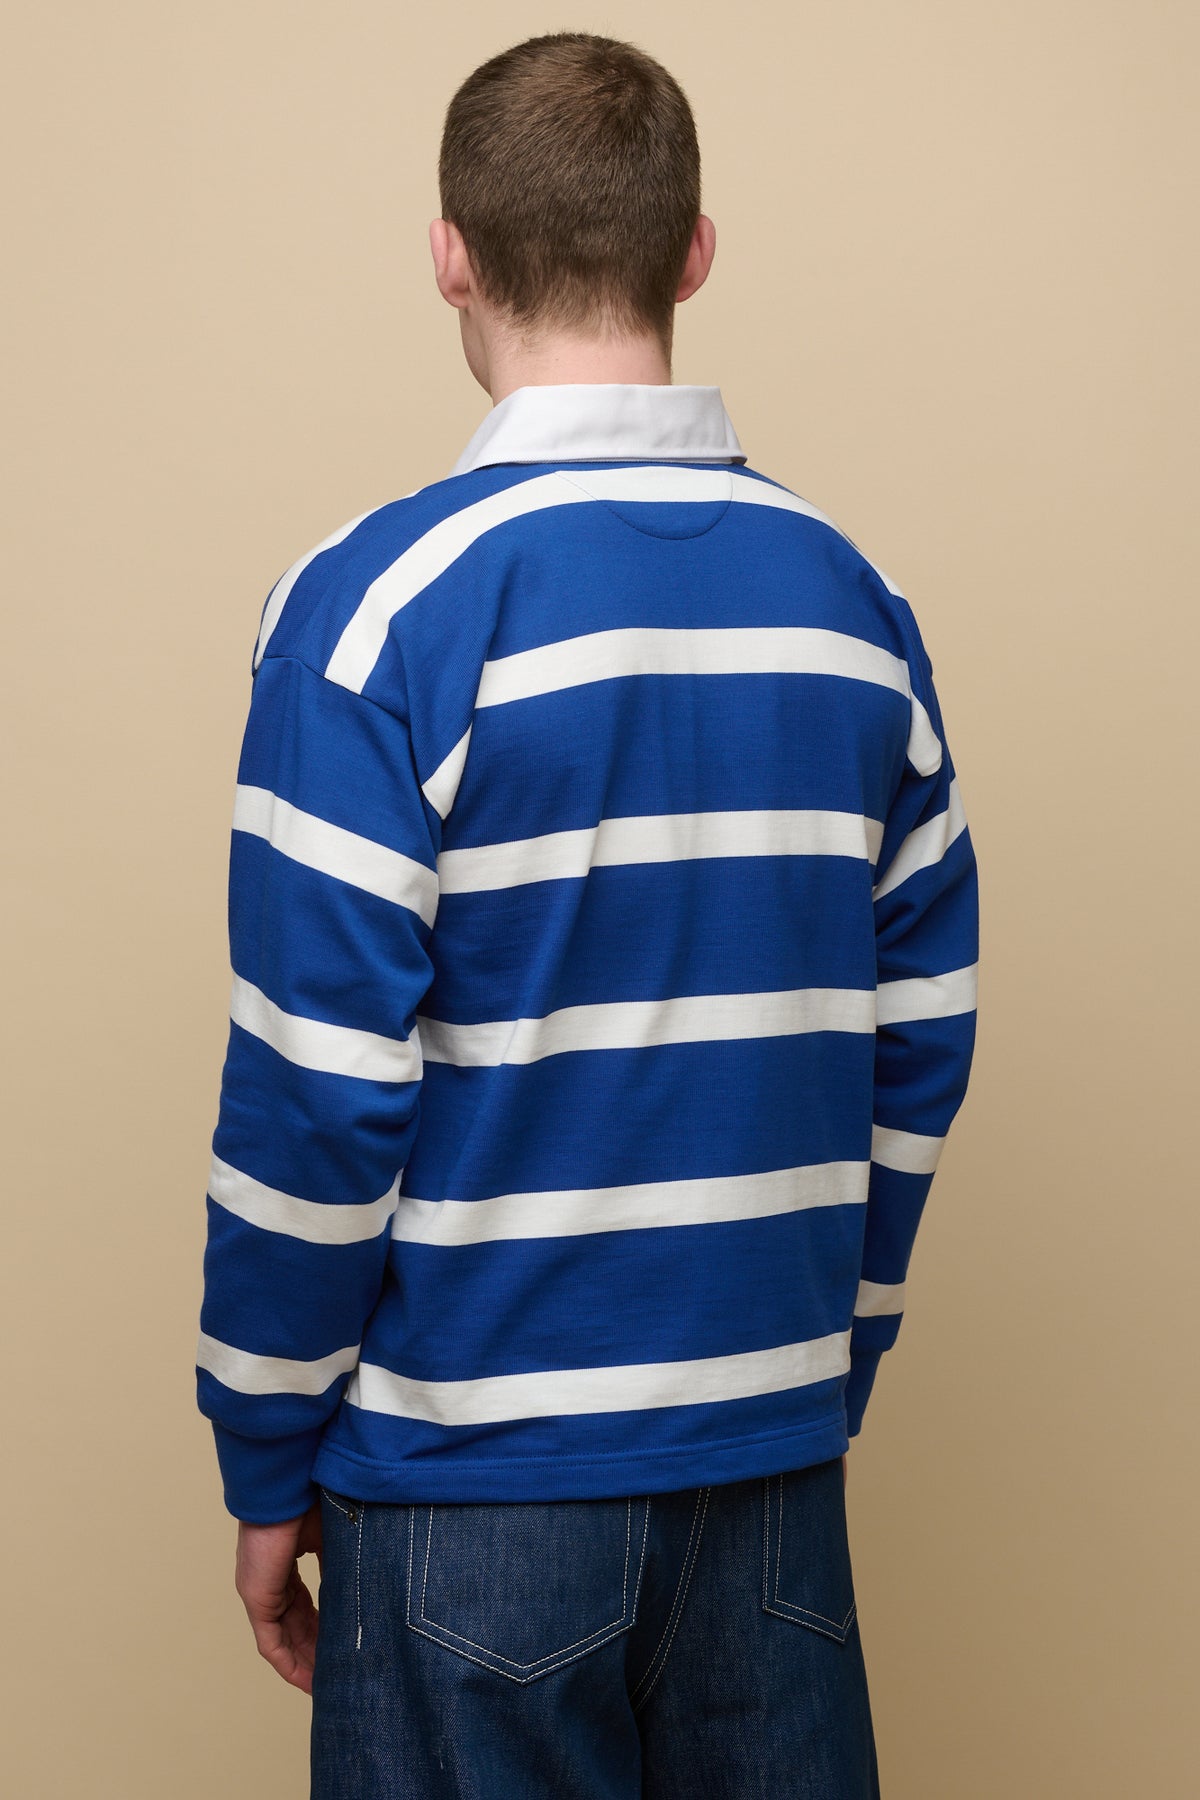 
            The back of male wearing stripe logo rugby shirt in blue white stripes paired with blue jean